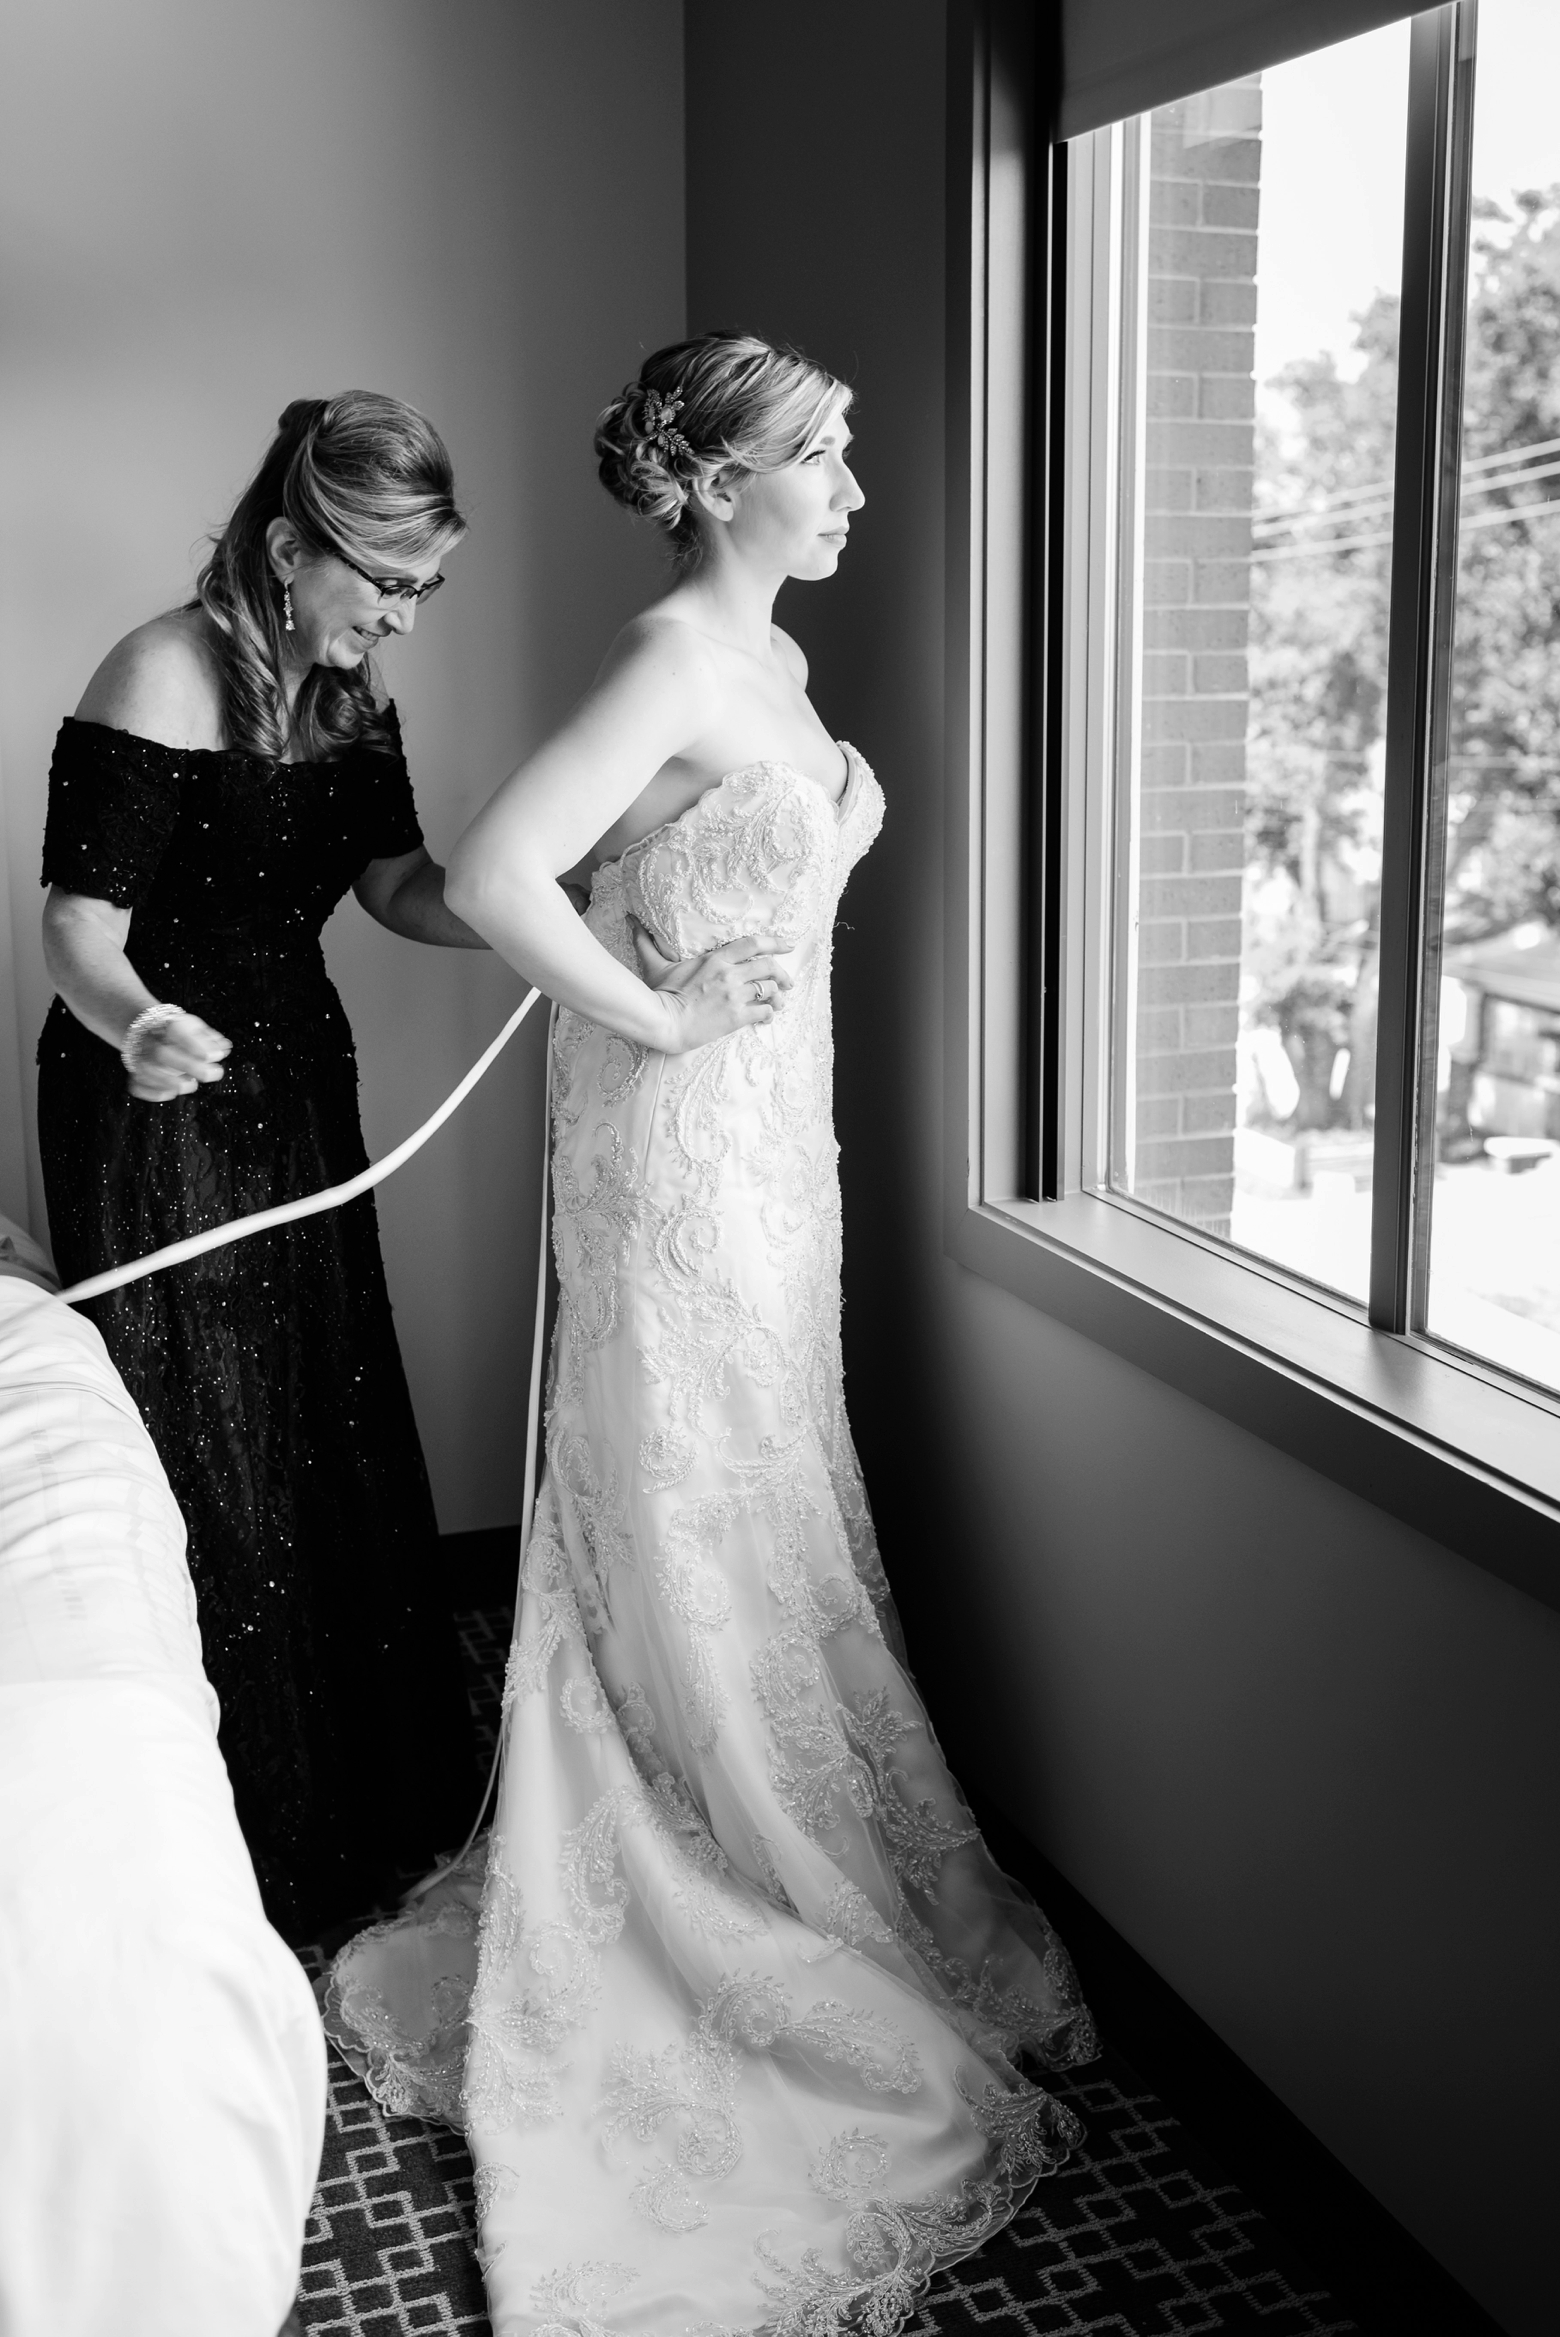 Bride and her Mom getting her into her wedding dress in timeless black and white